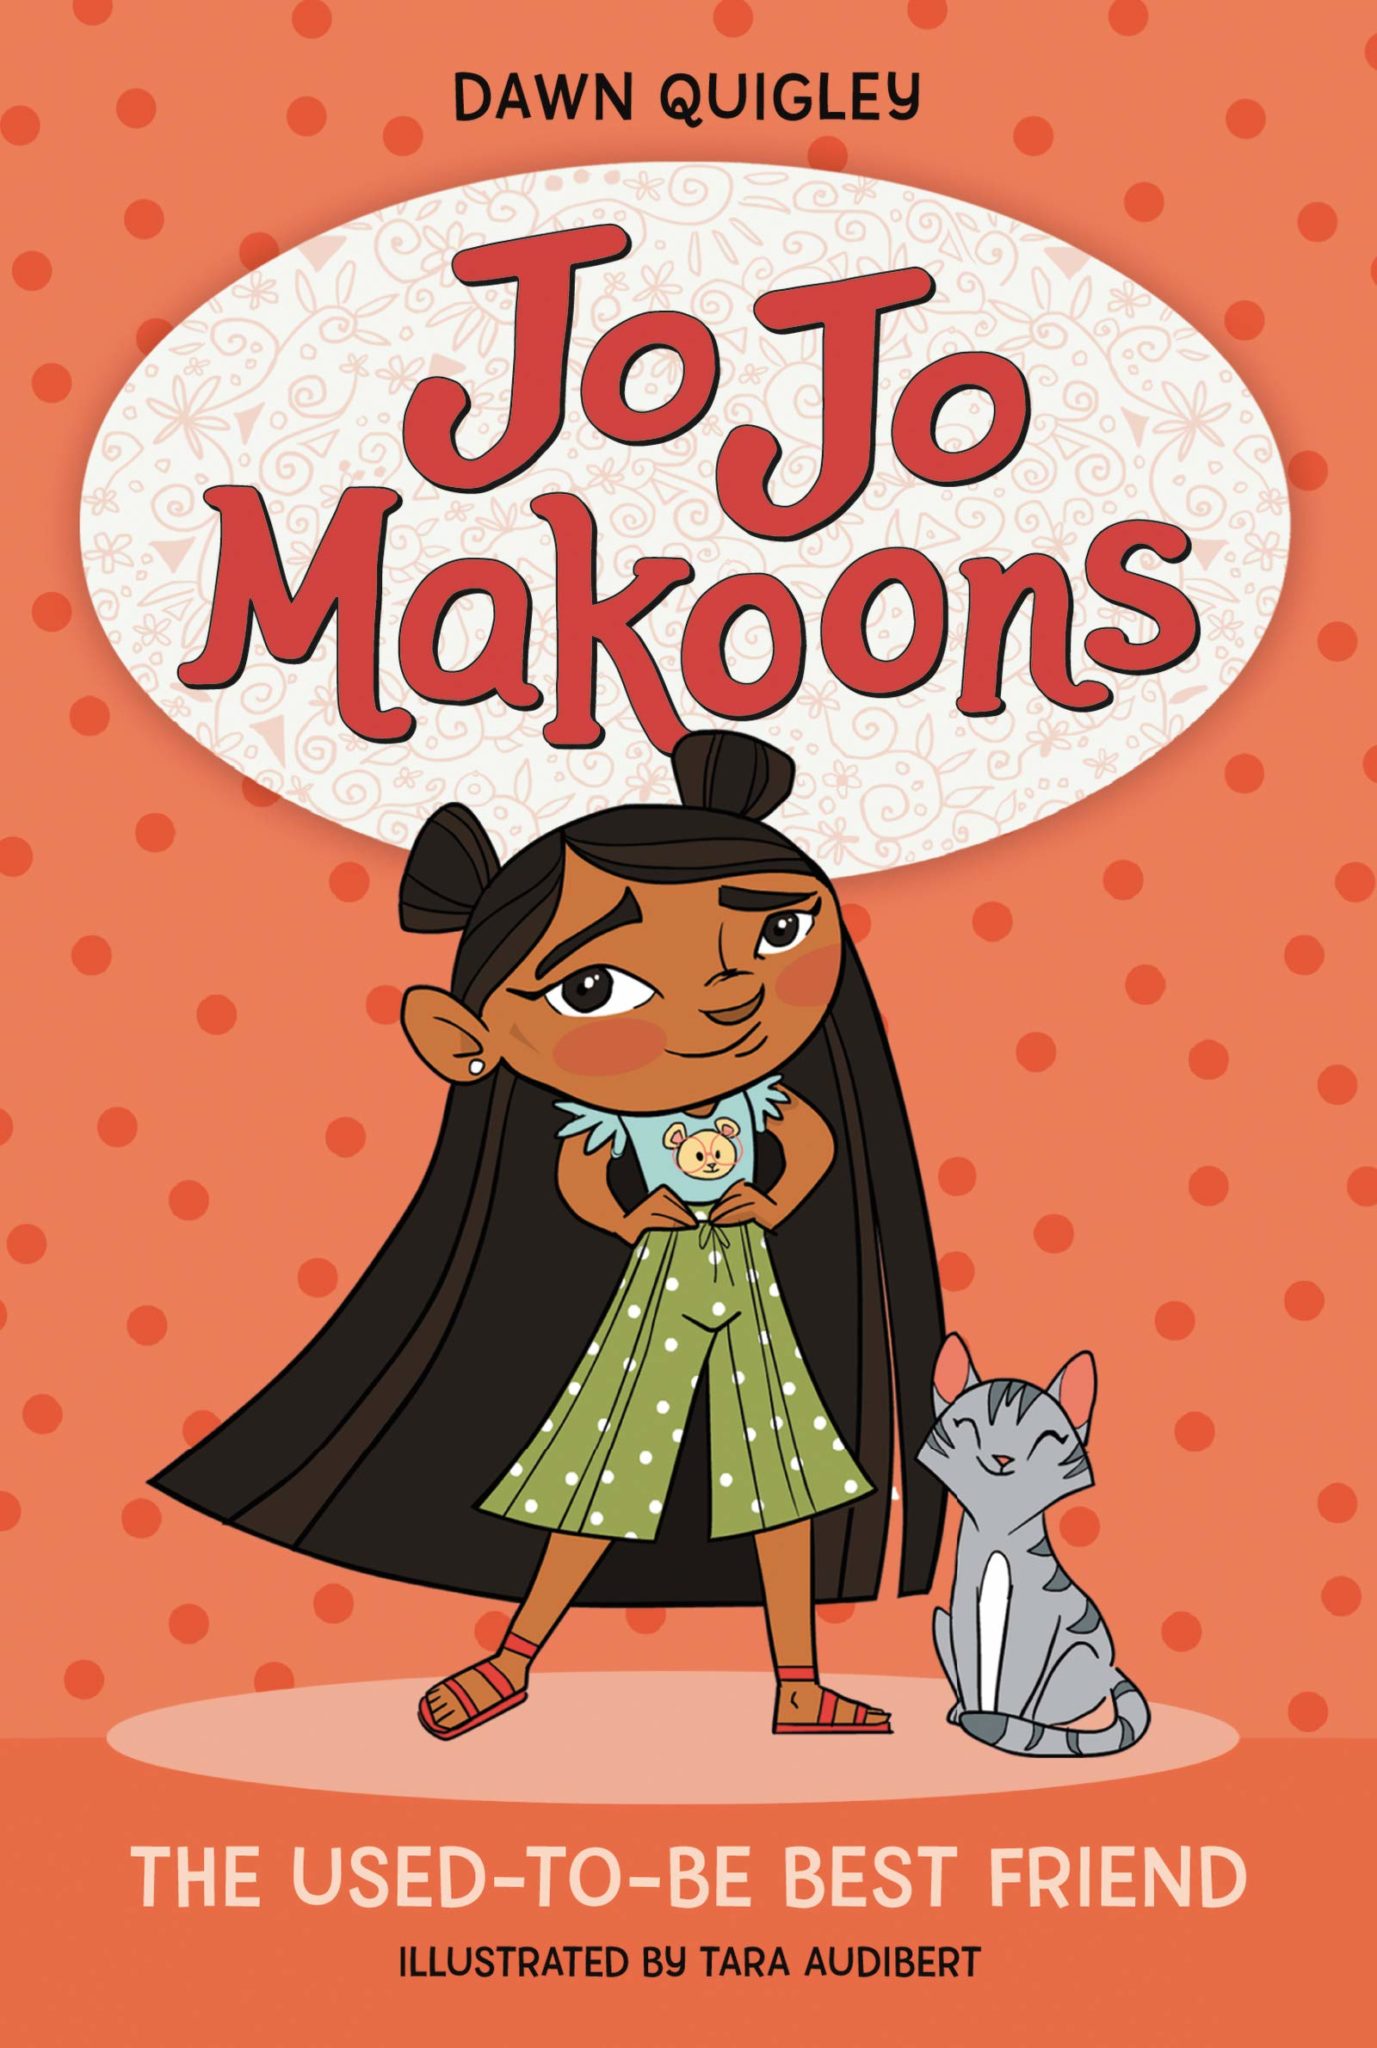 The cover of the book "Jo Jo Makoons: The Used-to-be Best Friend" features an illustration of a young Ojibwe girl and her gray cat. She wears her hair long with two buns and is wearing green pants and a t-shirt with a teddy bear on it. Her hands are on her waist as she smiles proudly.